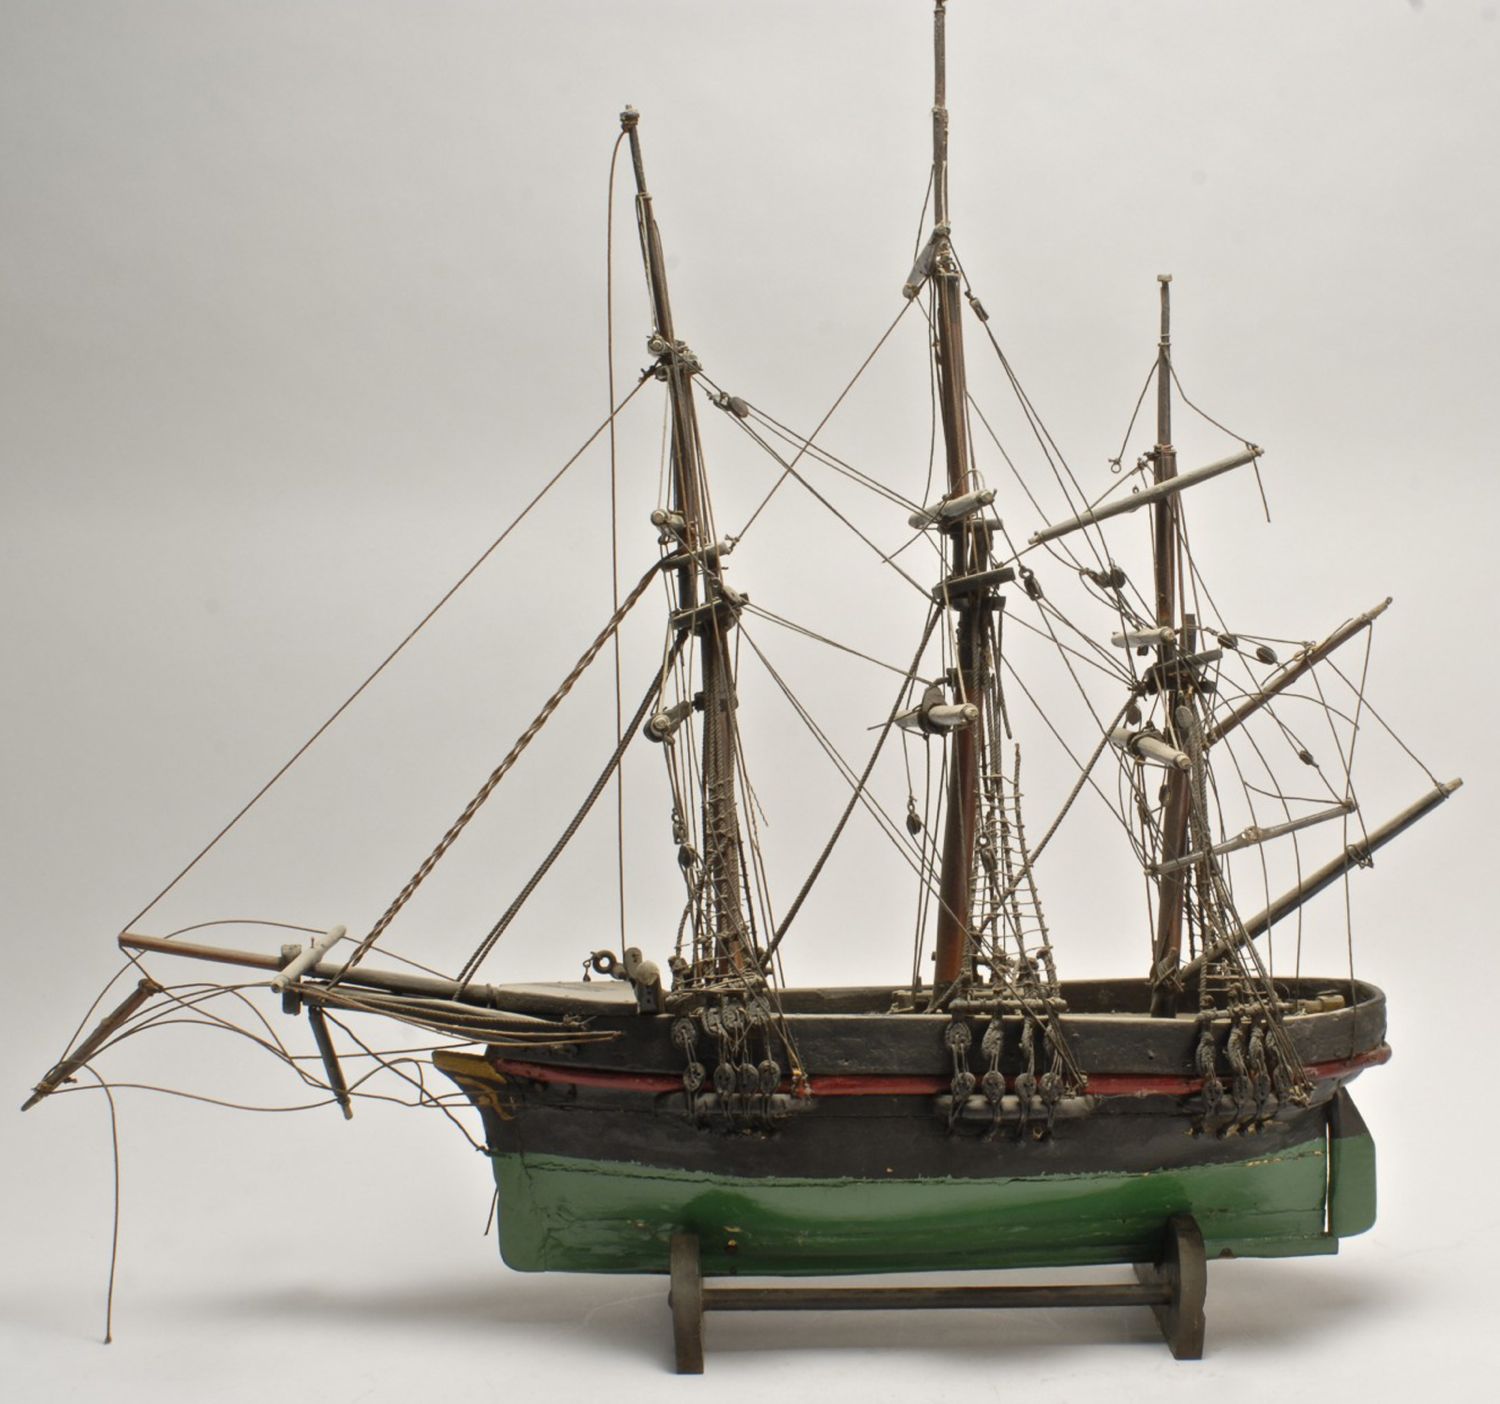 SAILOR-MADE MODEL OF A FULL-RIGGED